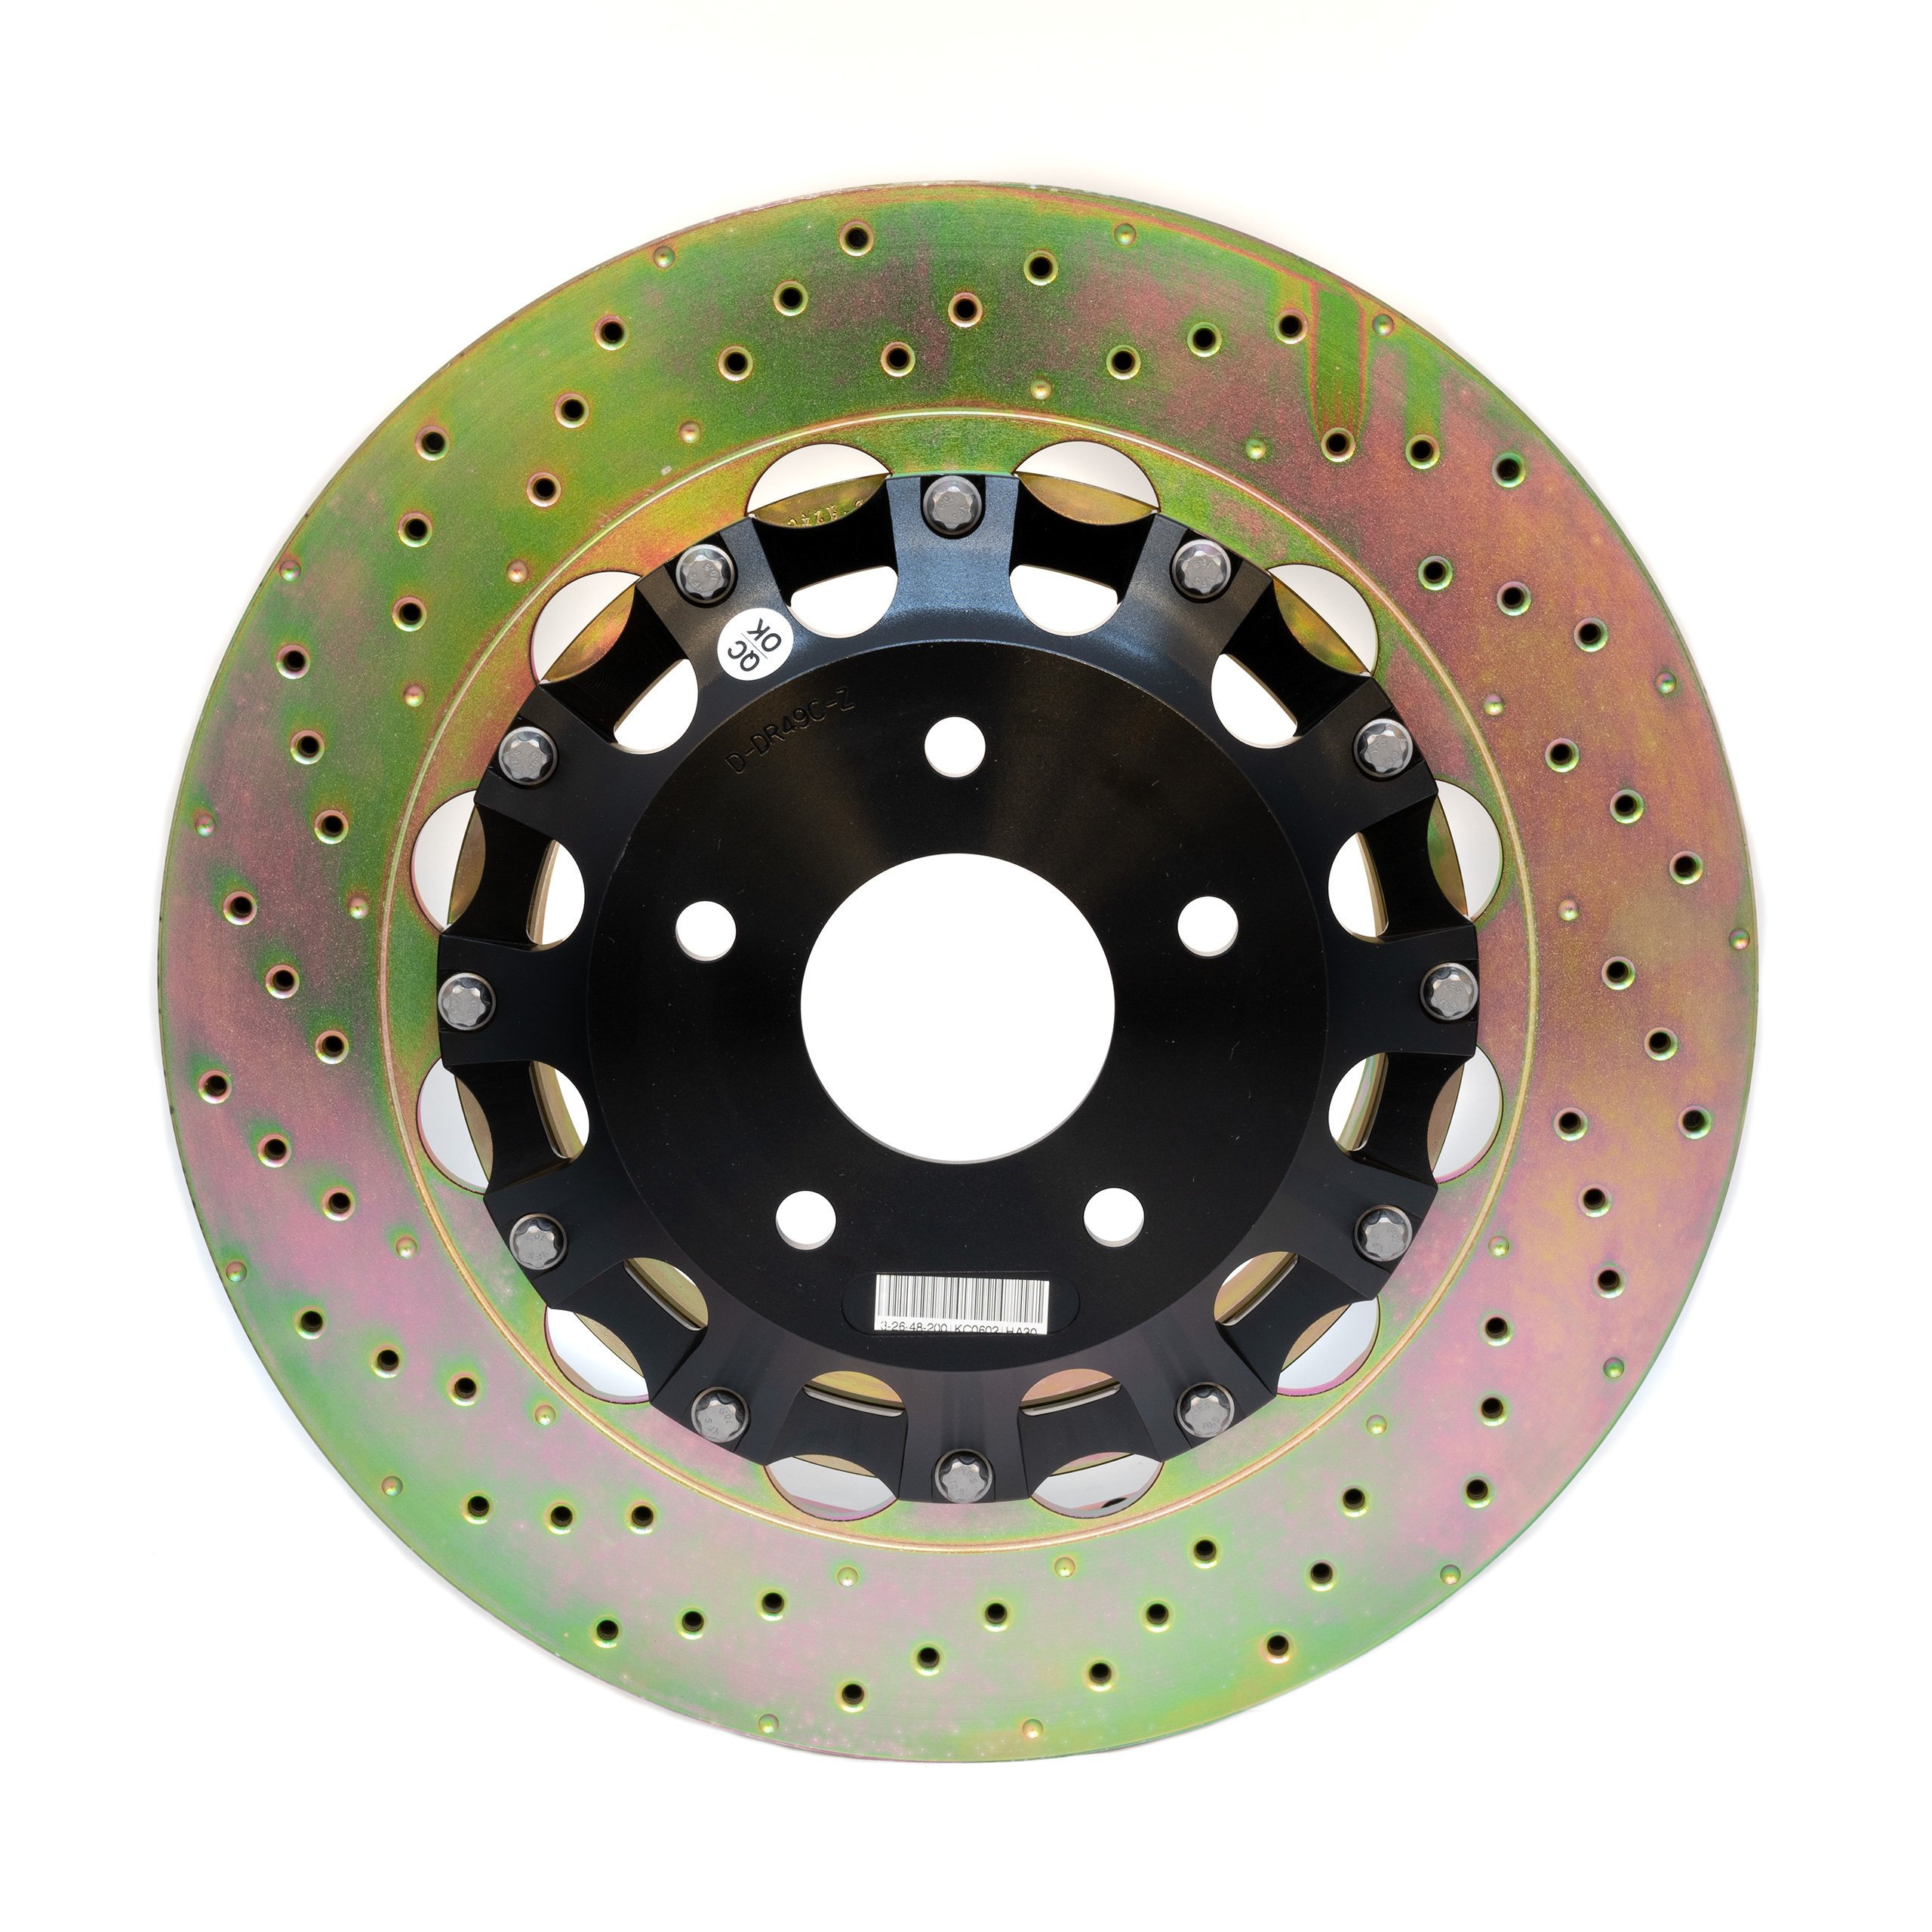 15 in. Brake Rotors - Lightweight 2-Piece Replacement Rotors